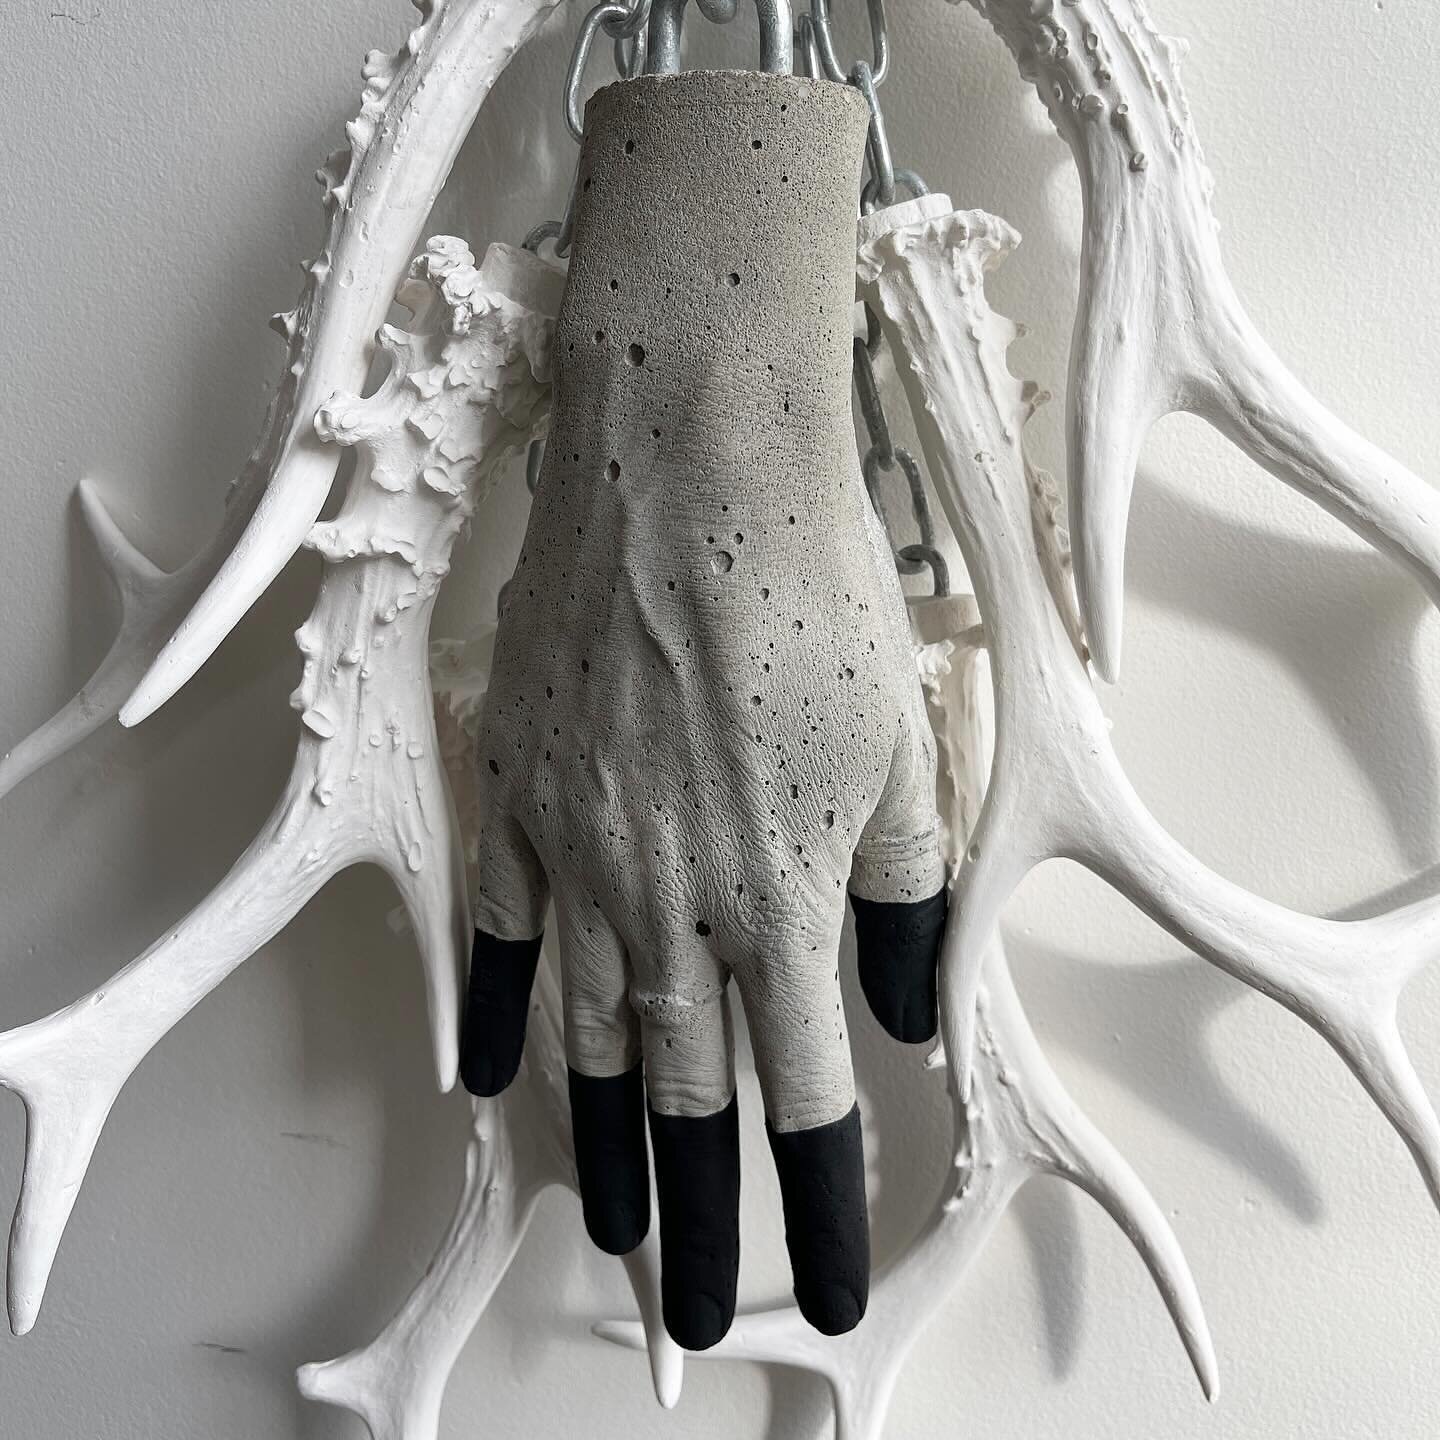 Last few days to catch this baby in the &lsquo;Liminal Salon&rsquo; show alongside beautiful works by some wonderful people. The show closes this Saturday! 🦀

SALVACI
2023
Herculite plaster, Galvanised chain, Concrete, Matt black paint, Caribiner, H